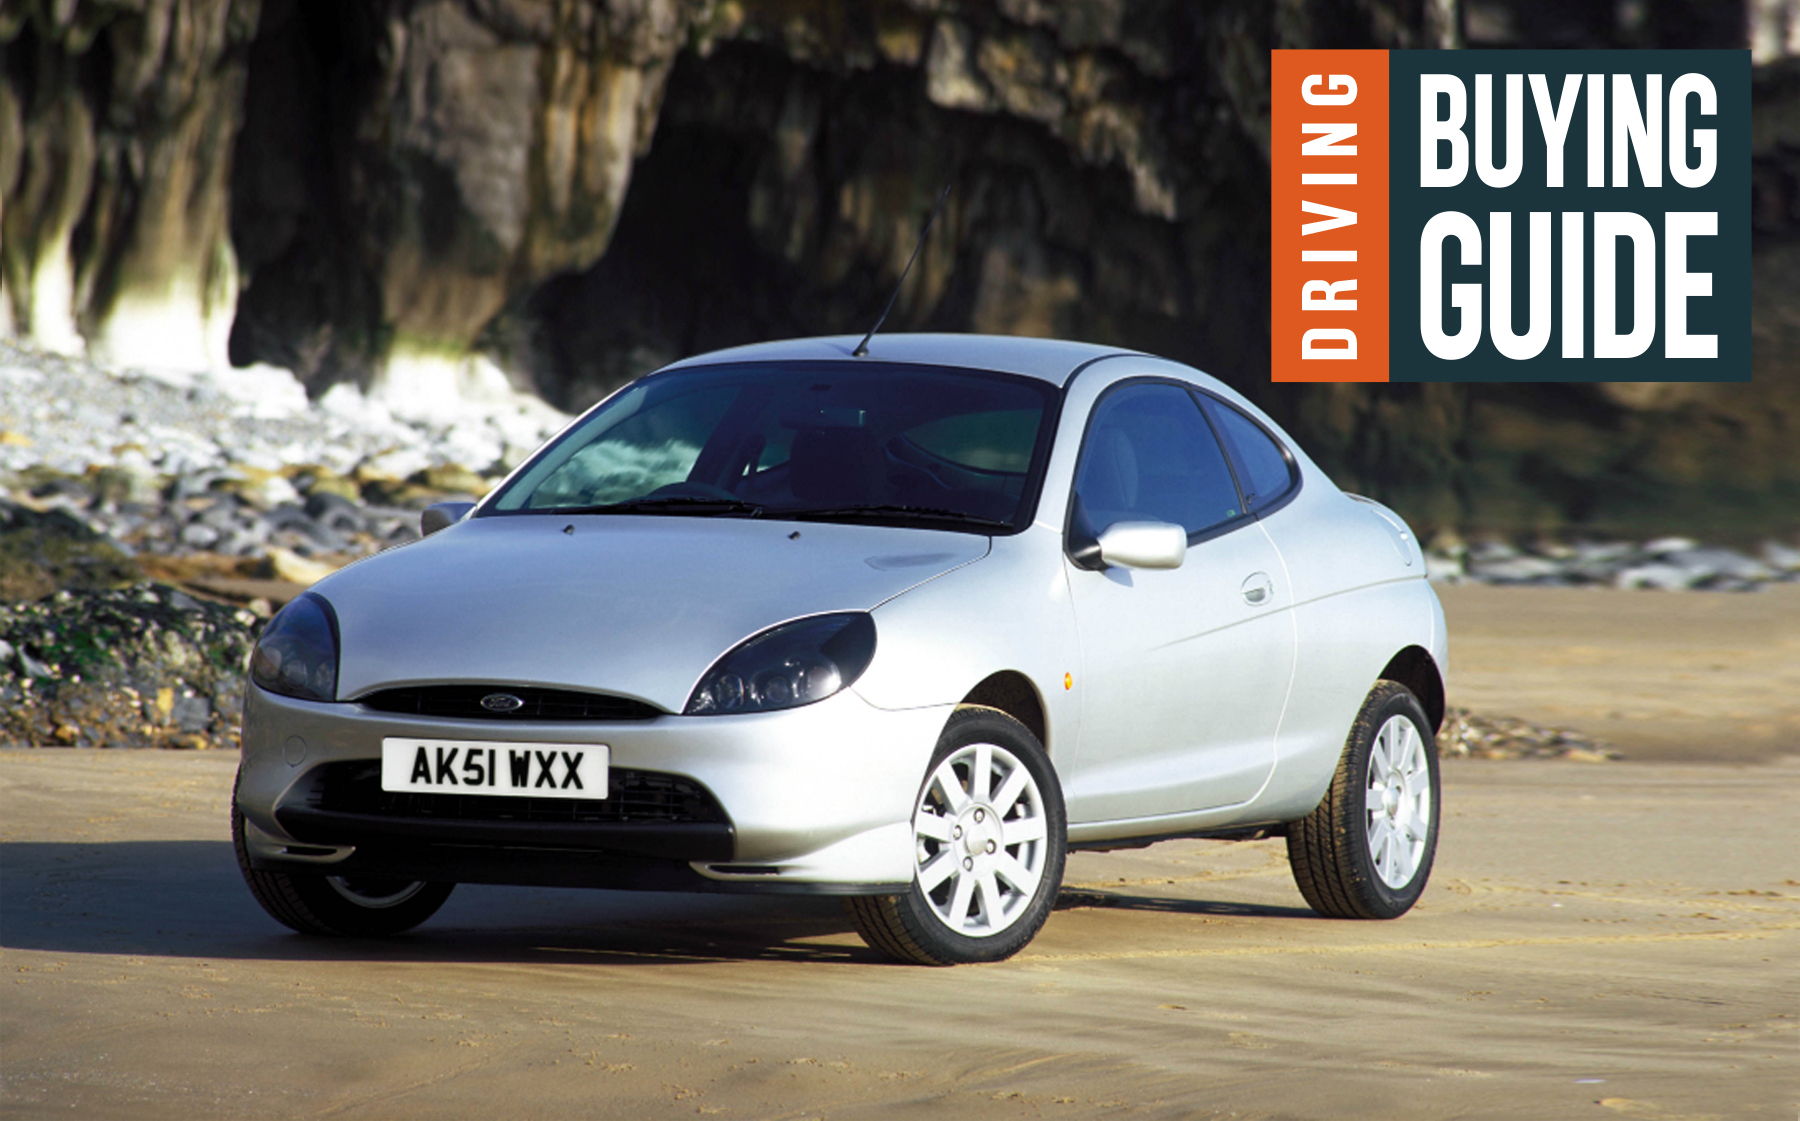 Buying Guide: Great used cars for £1000